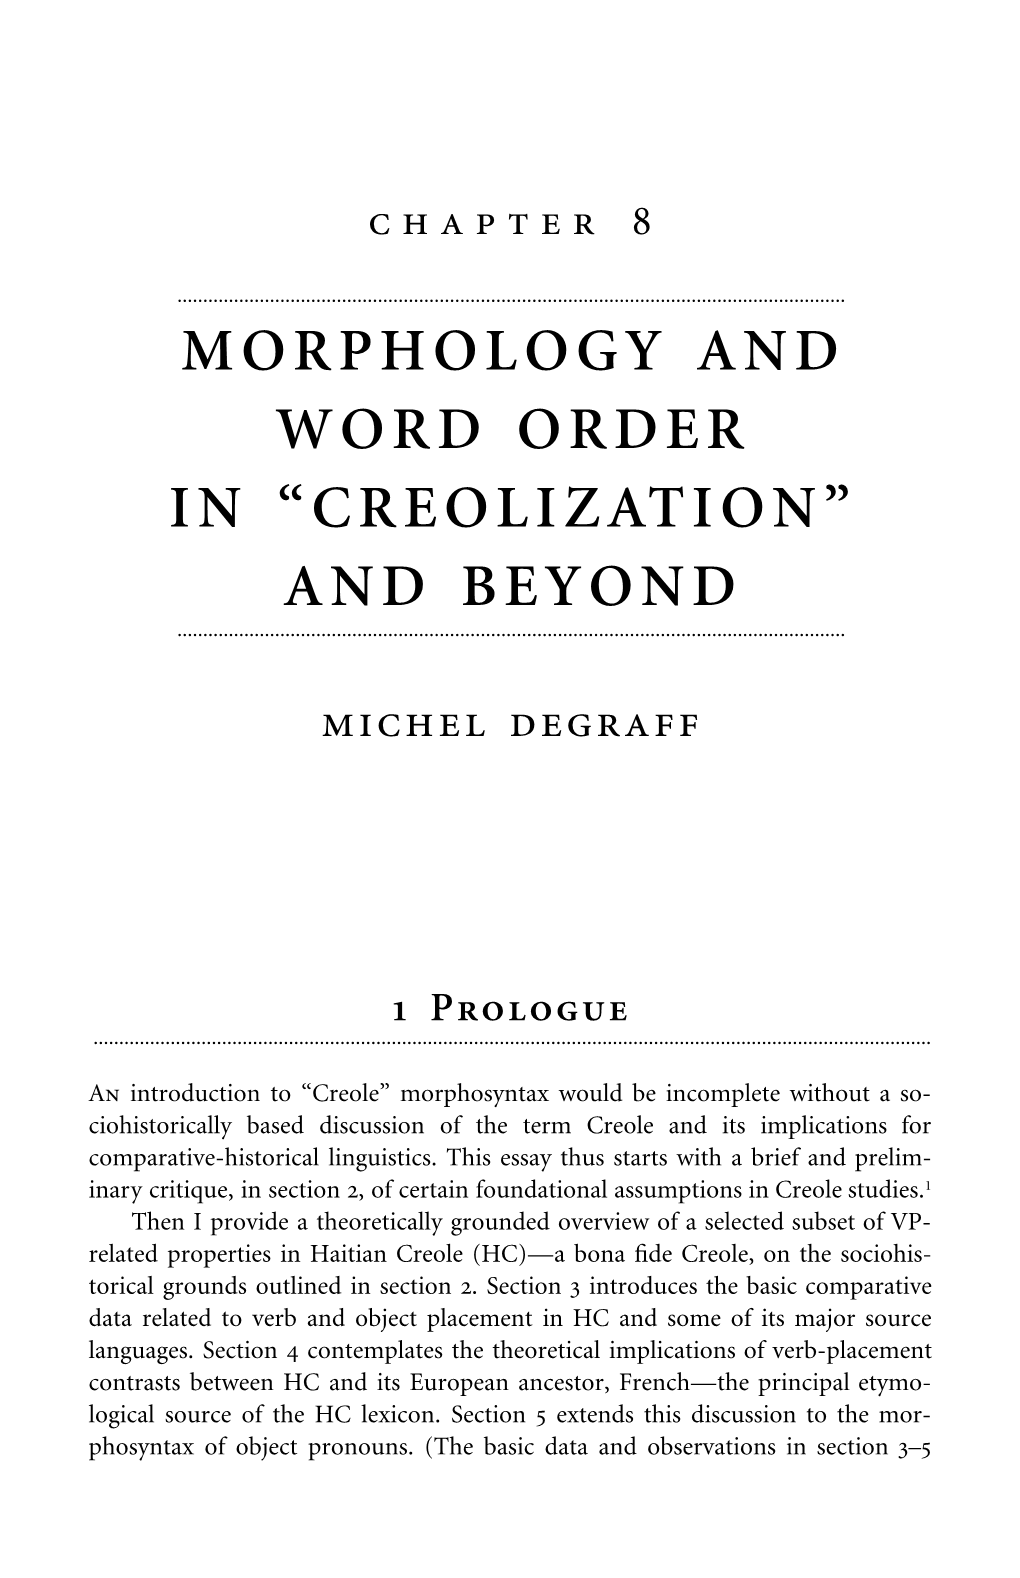 "Morphology and Word Order in 'Creolization' and Beyond"